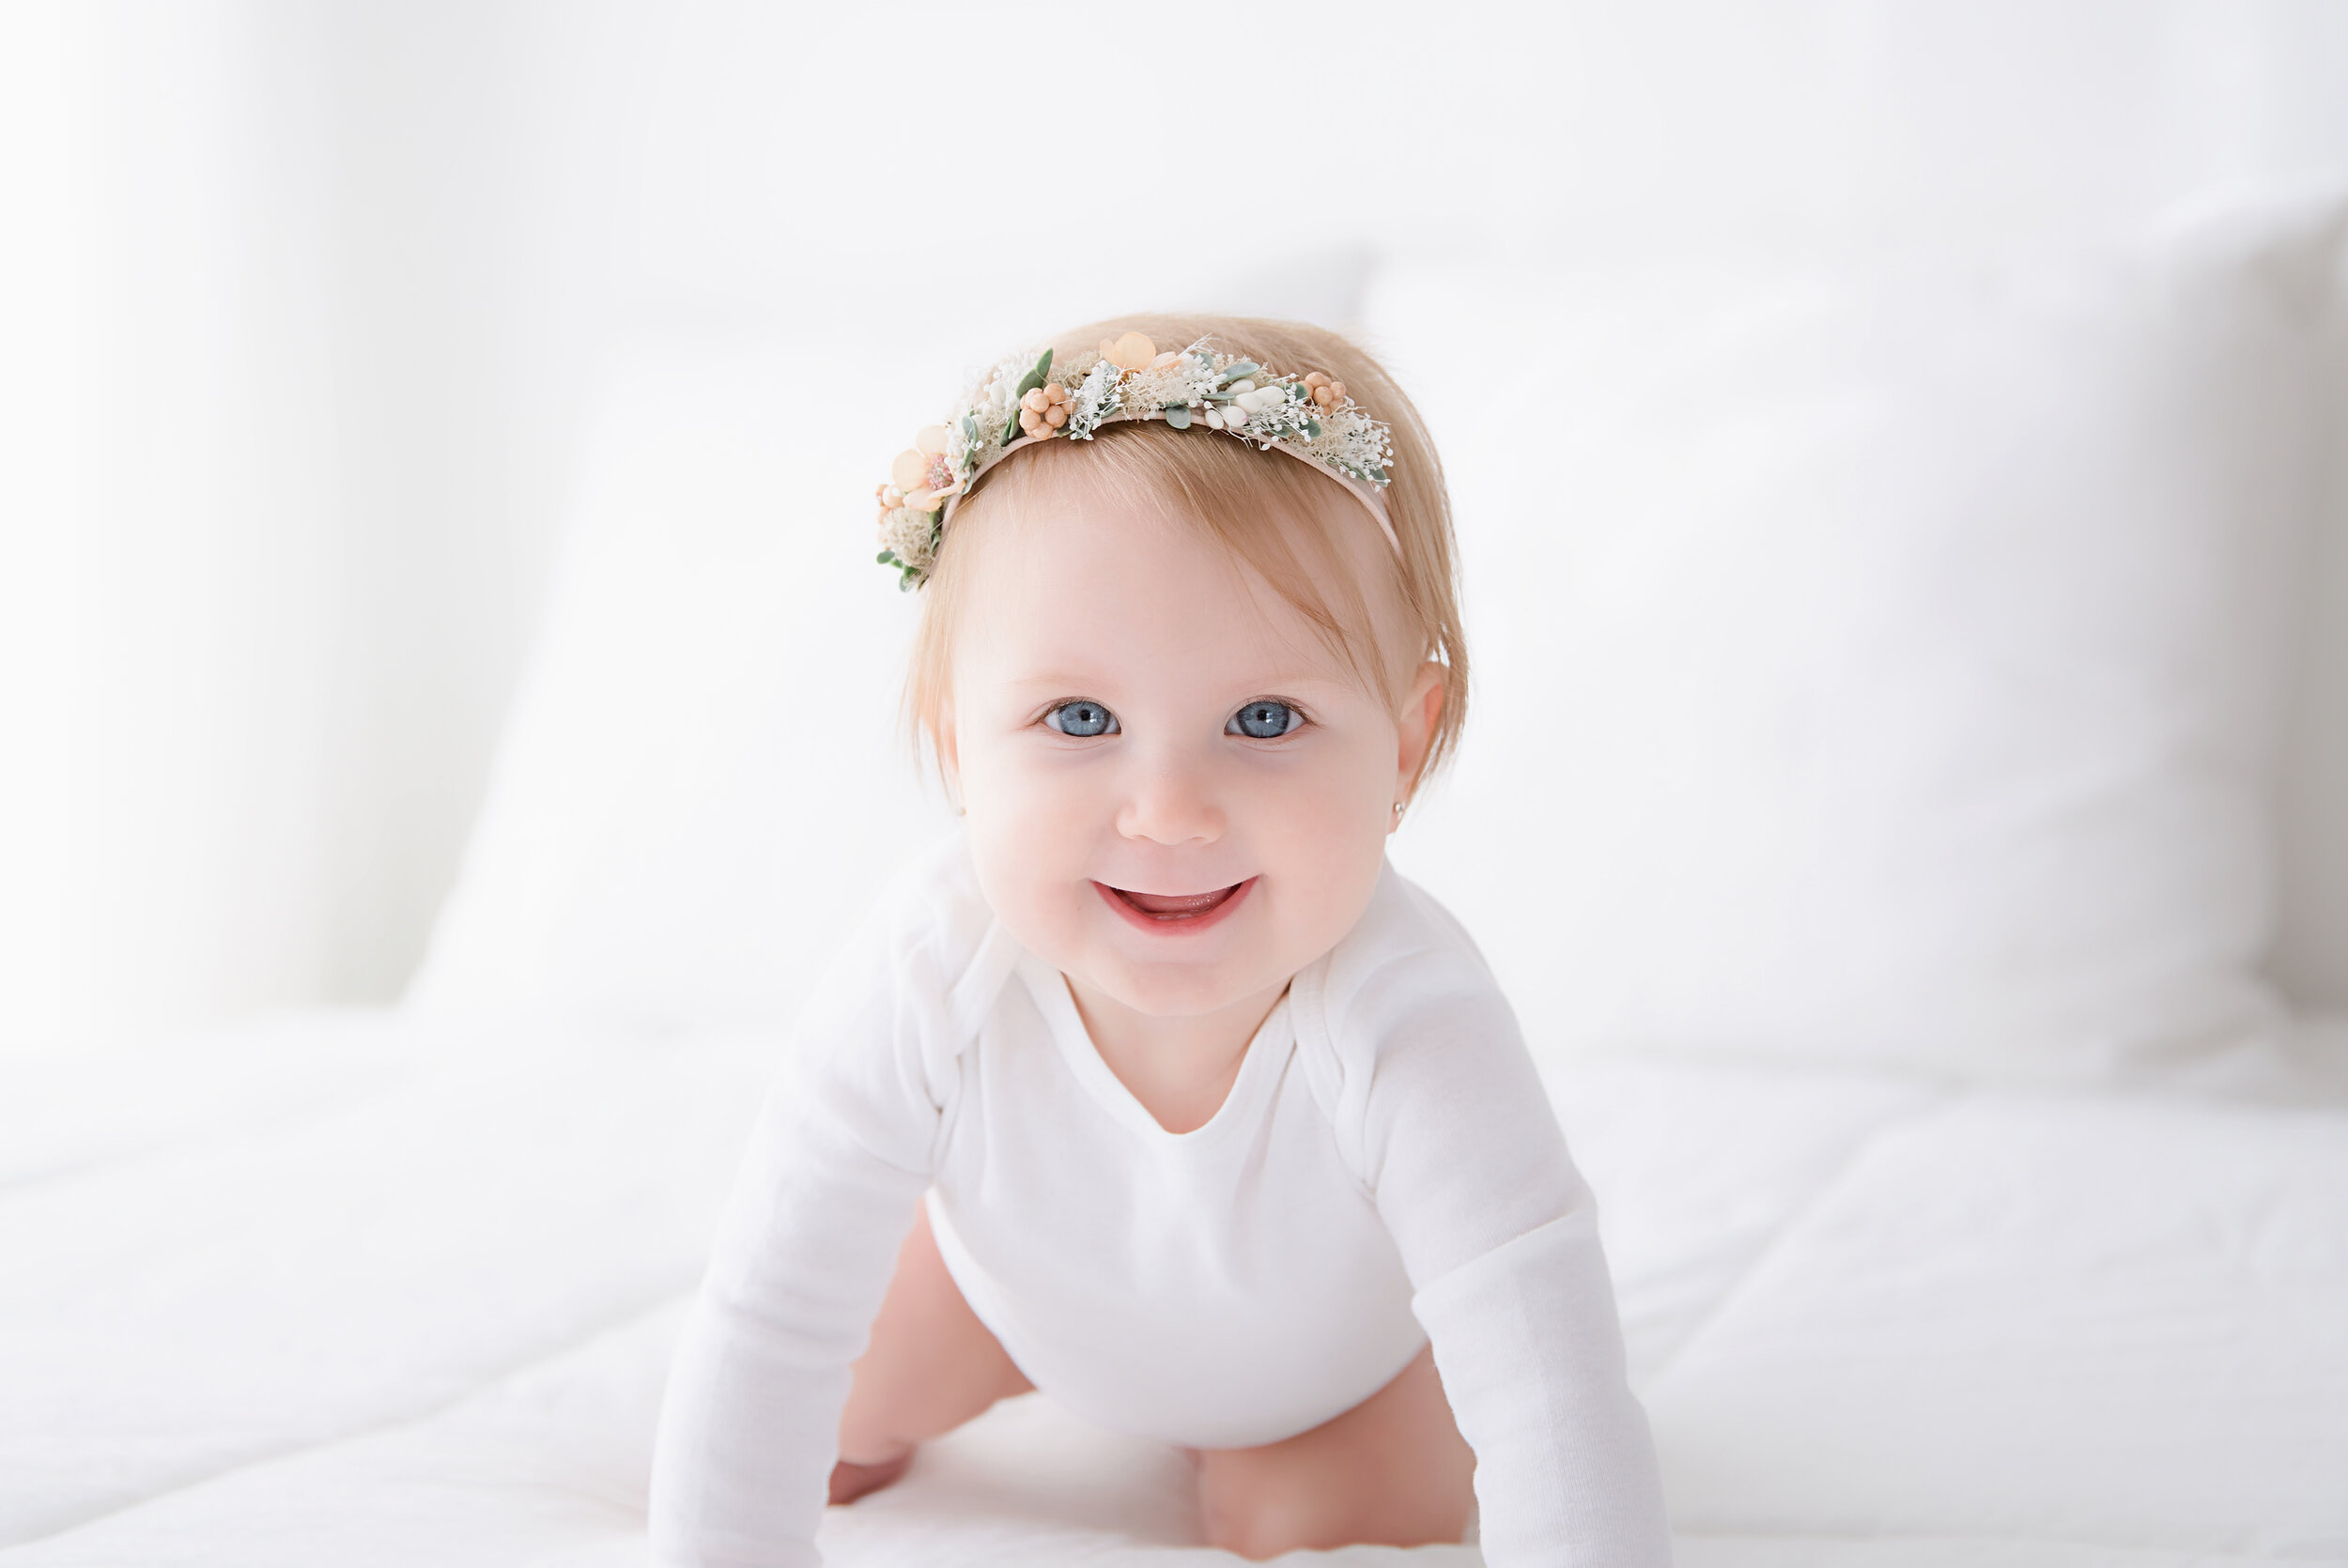 8 month old baby girl photo